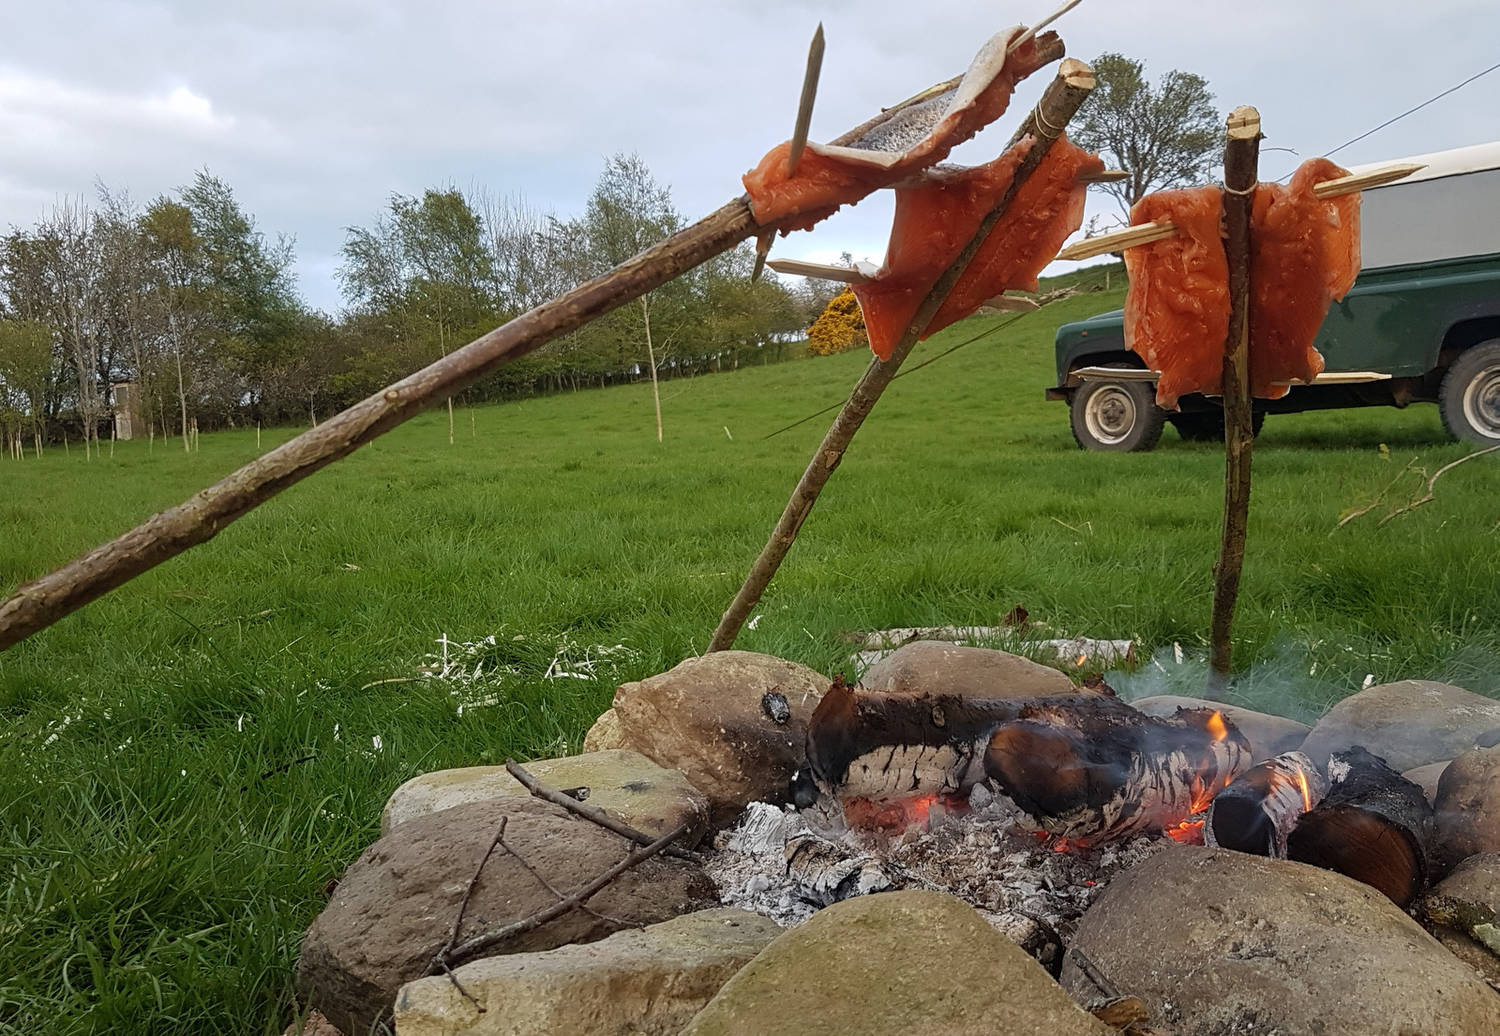 A photograph of trout being cooked on sticks over an outdoor fire